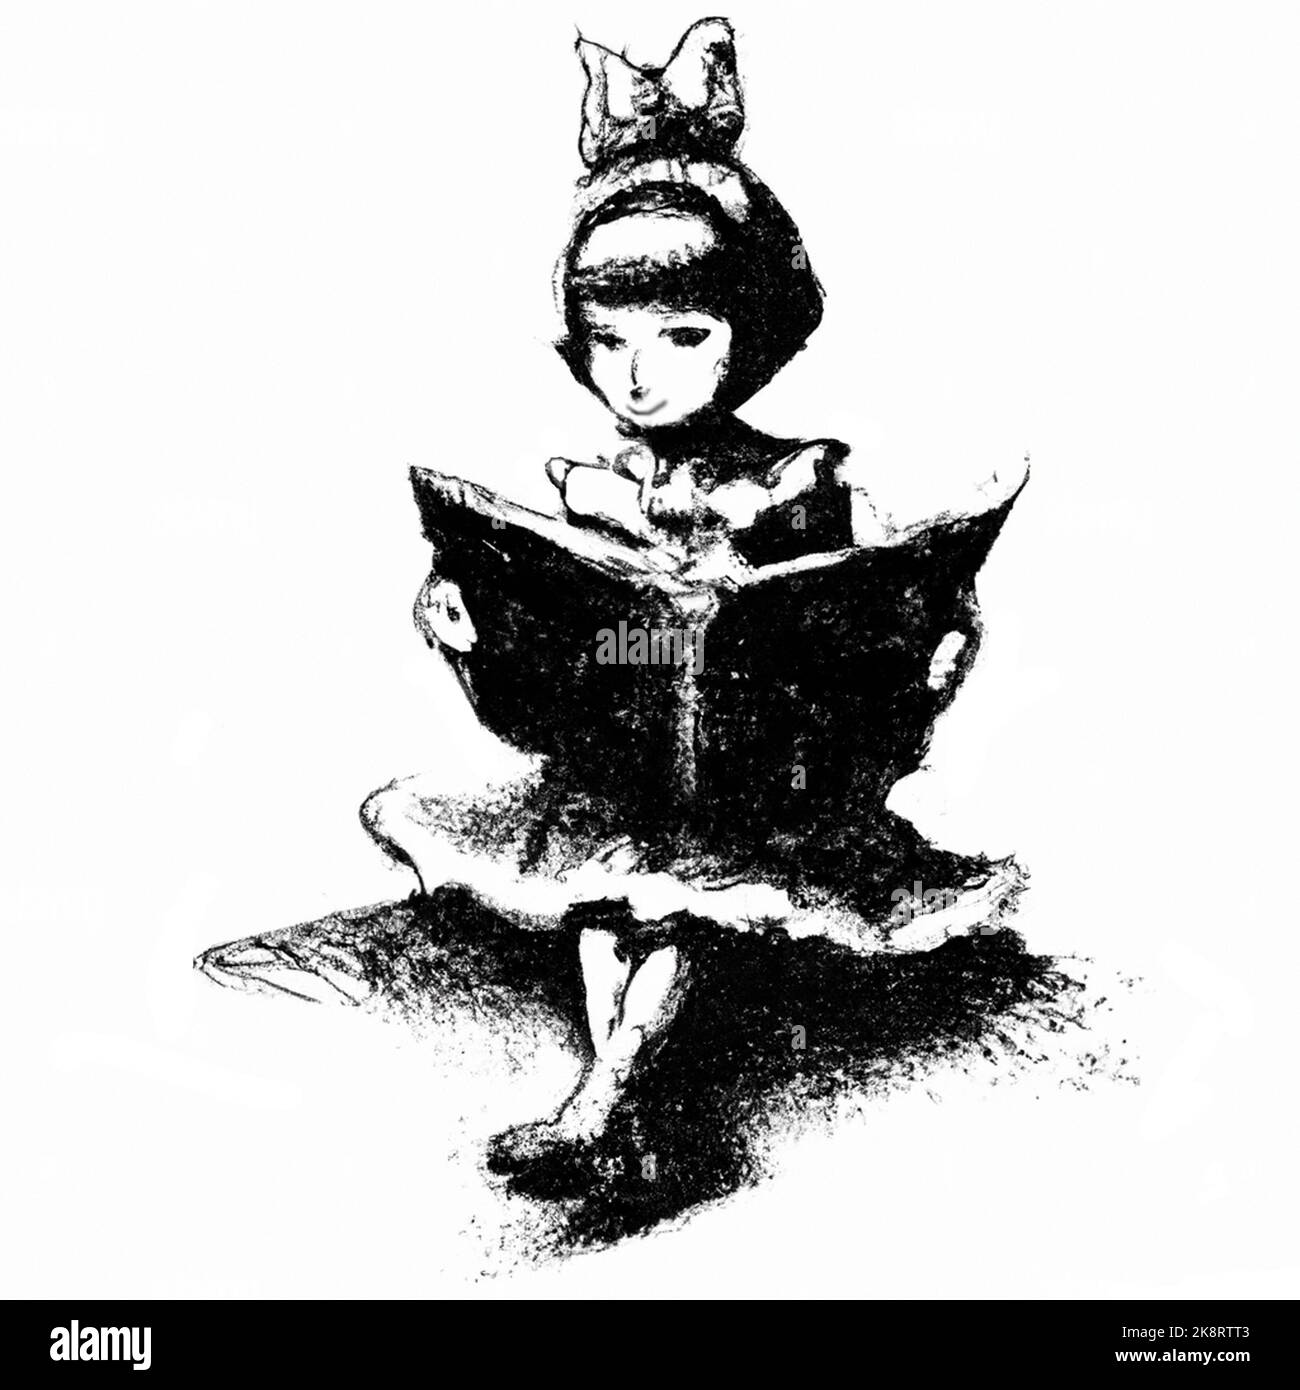 Young girl sitting with a large book, reading. Bow in her hair, black and white hand drawn illustration. Stock Photo